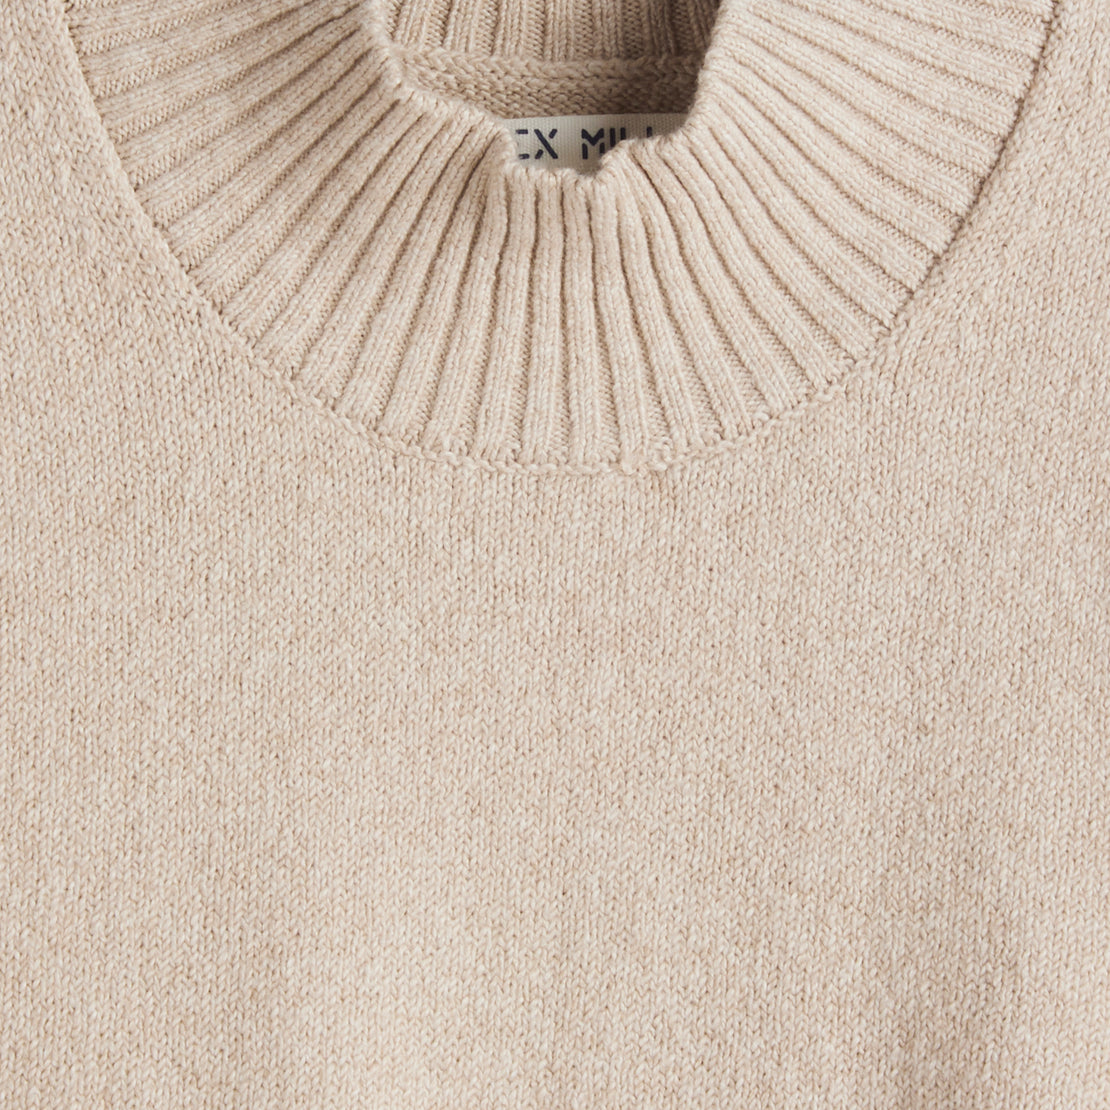 Sleeveless Mock Neck Sweater - Oatmeal - Alex Mill - STAG Provisions - W - Tops - Sleeveless